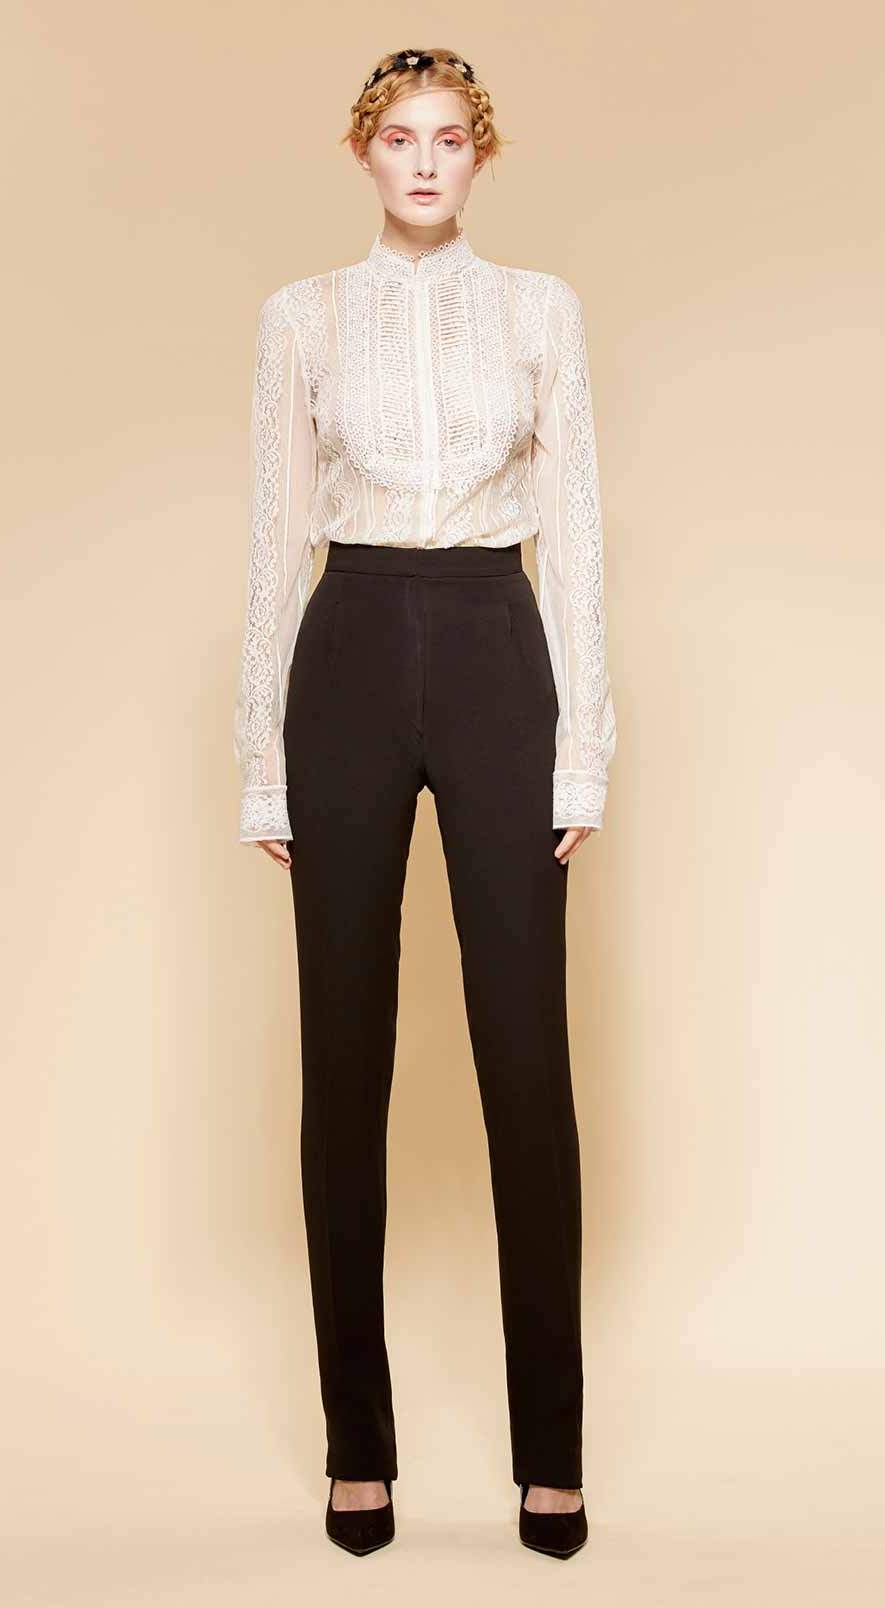 Long-sleeves white mao collar blouse, and straight-leg black georgette